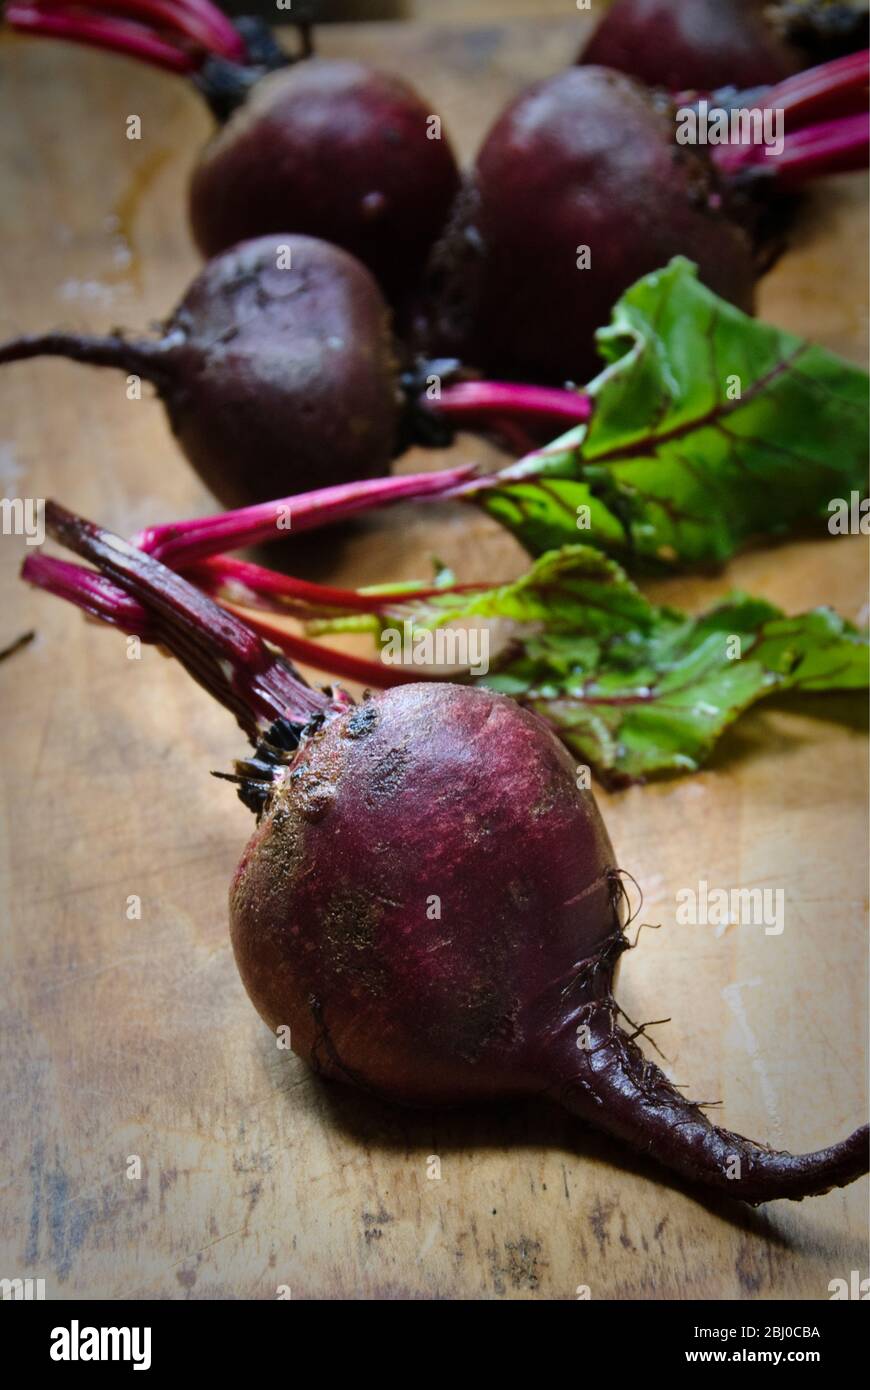 Whole fresh raw beetroots on wooden board - Stock Photo